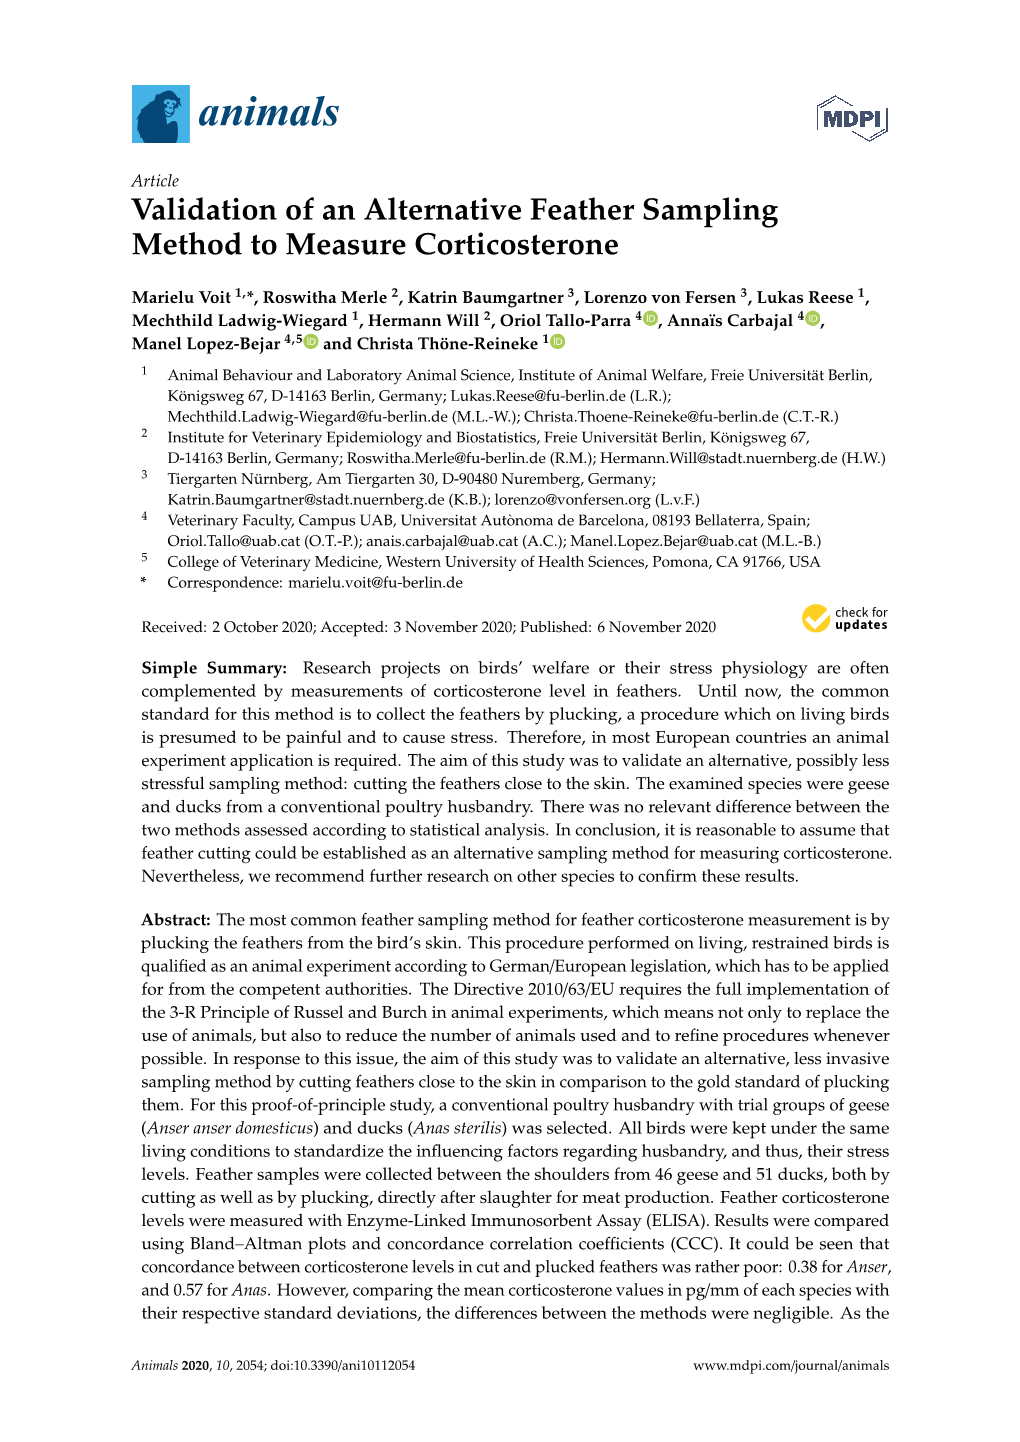 Validation of an Alternative Feather Sampling Method to Measure Corticosterone